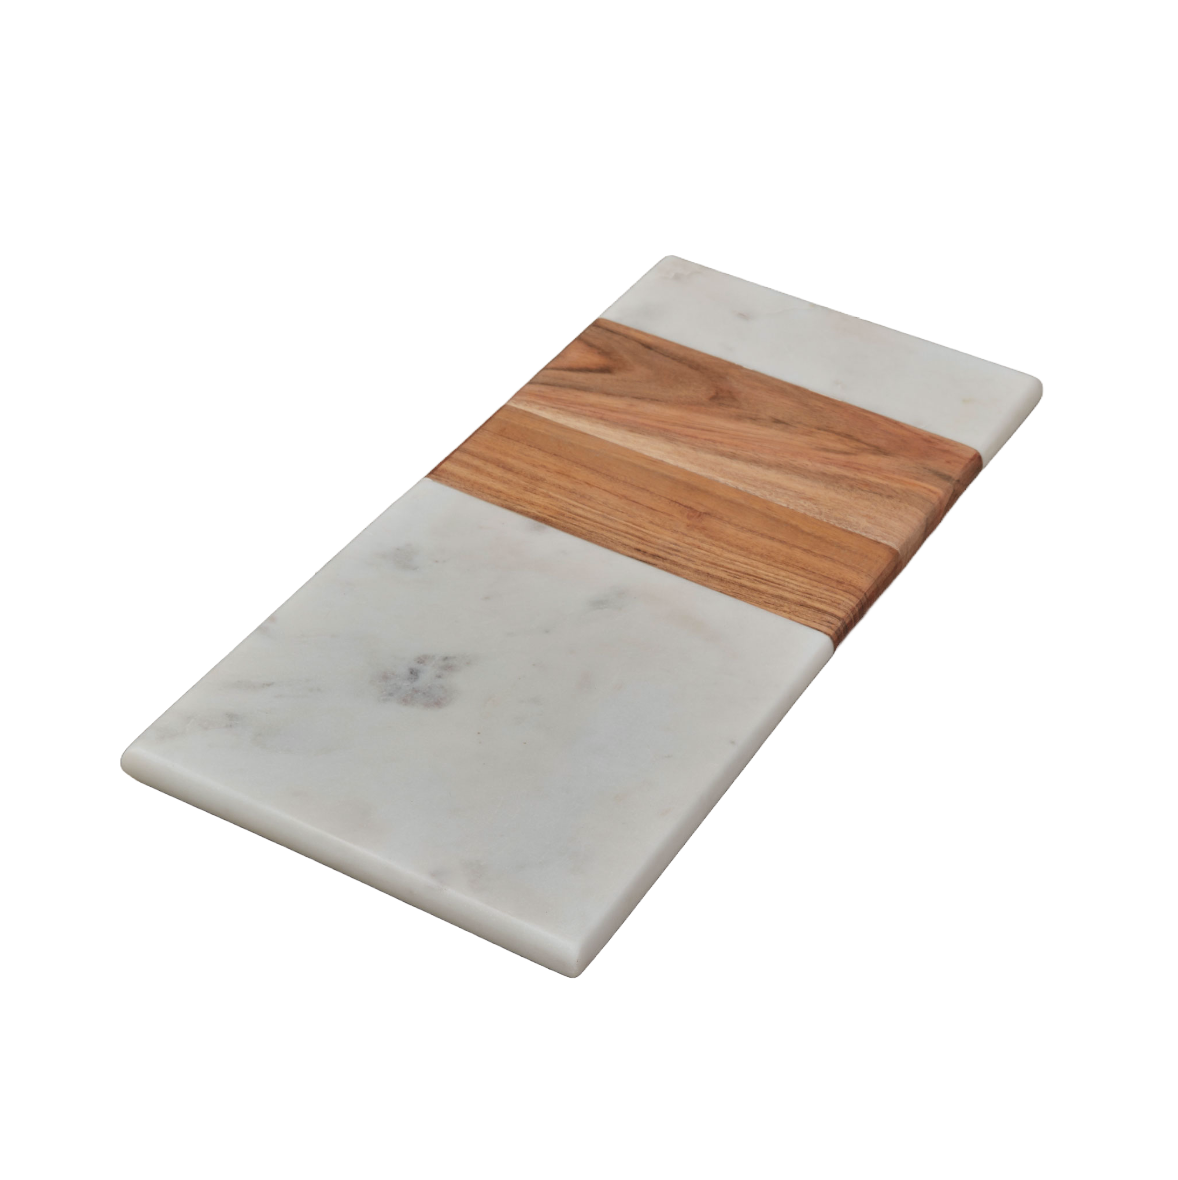 Marble & Wood Cheese Board with Matte Gold Cheese Servers